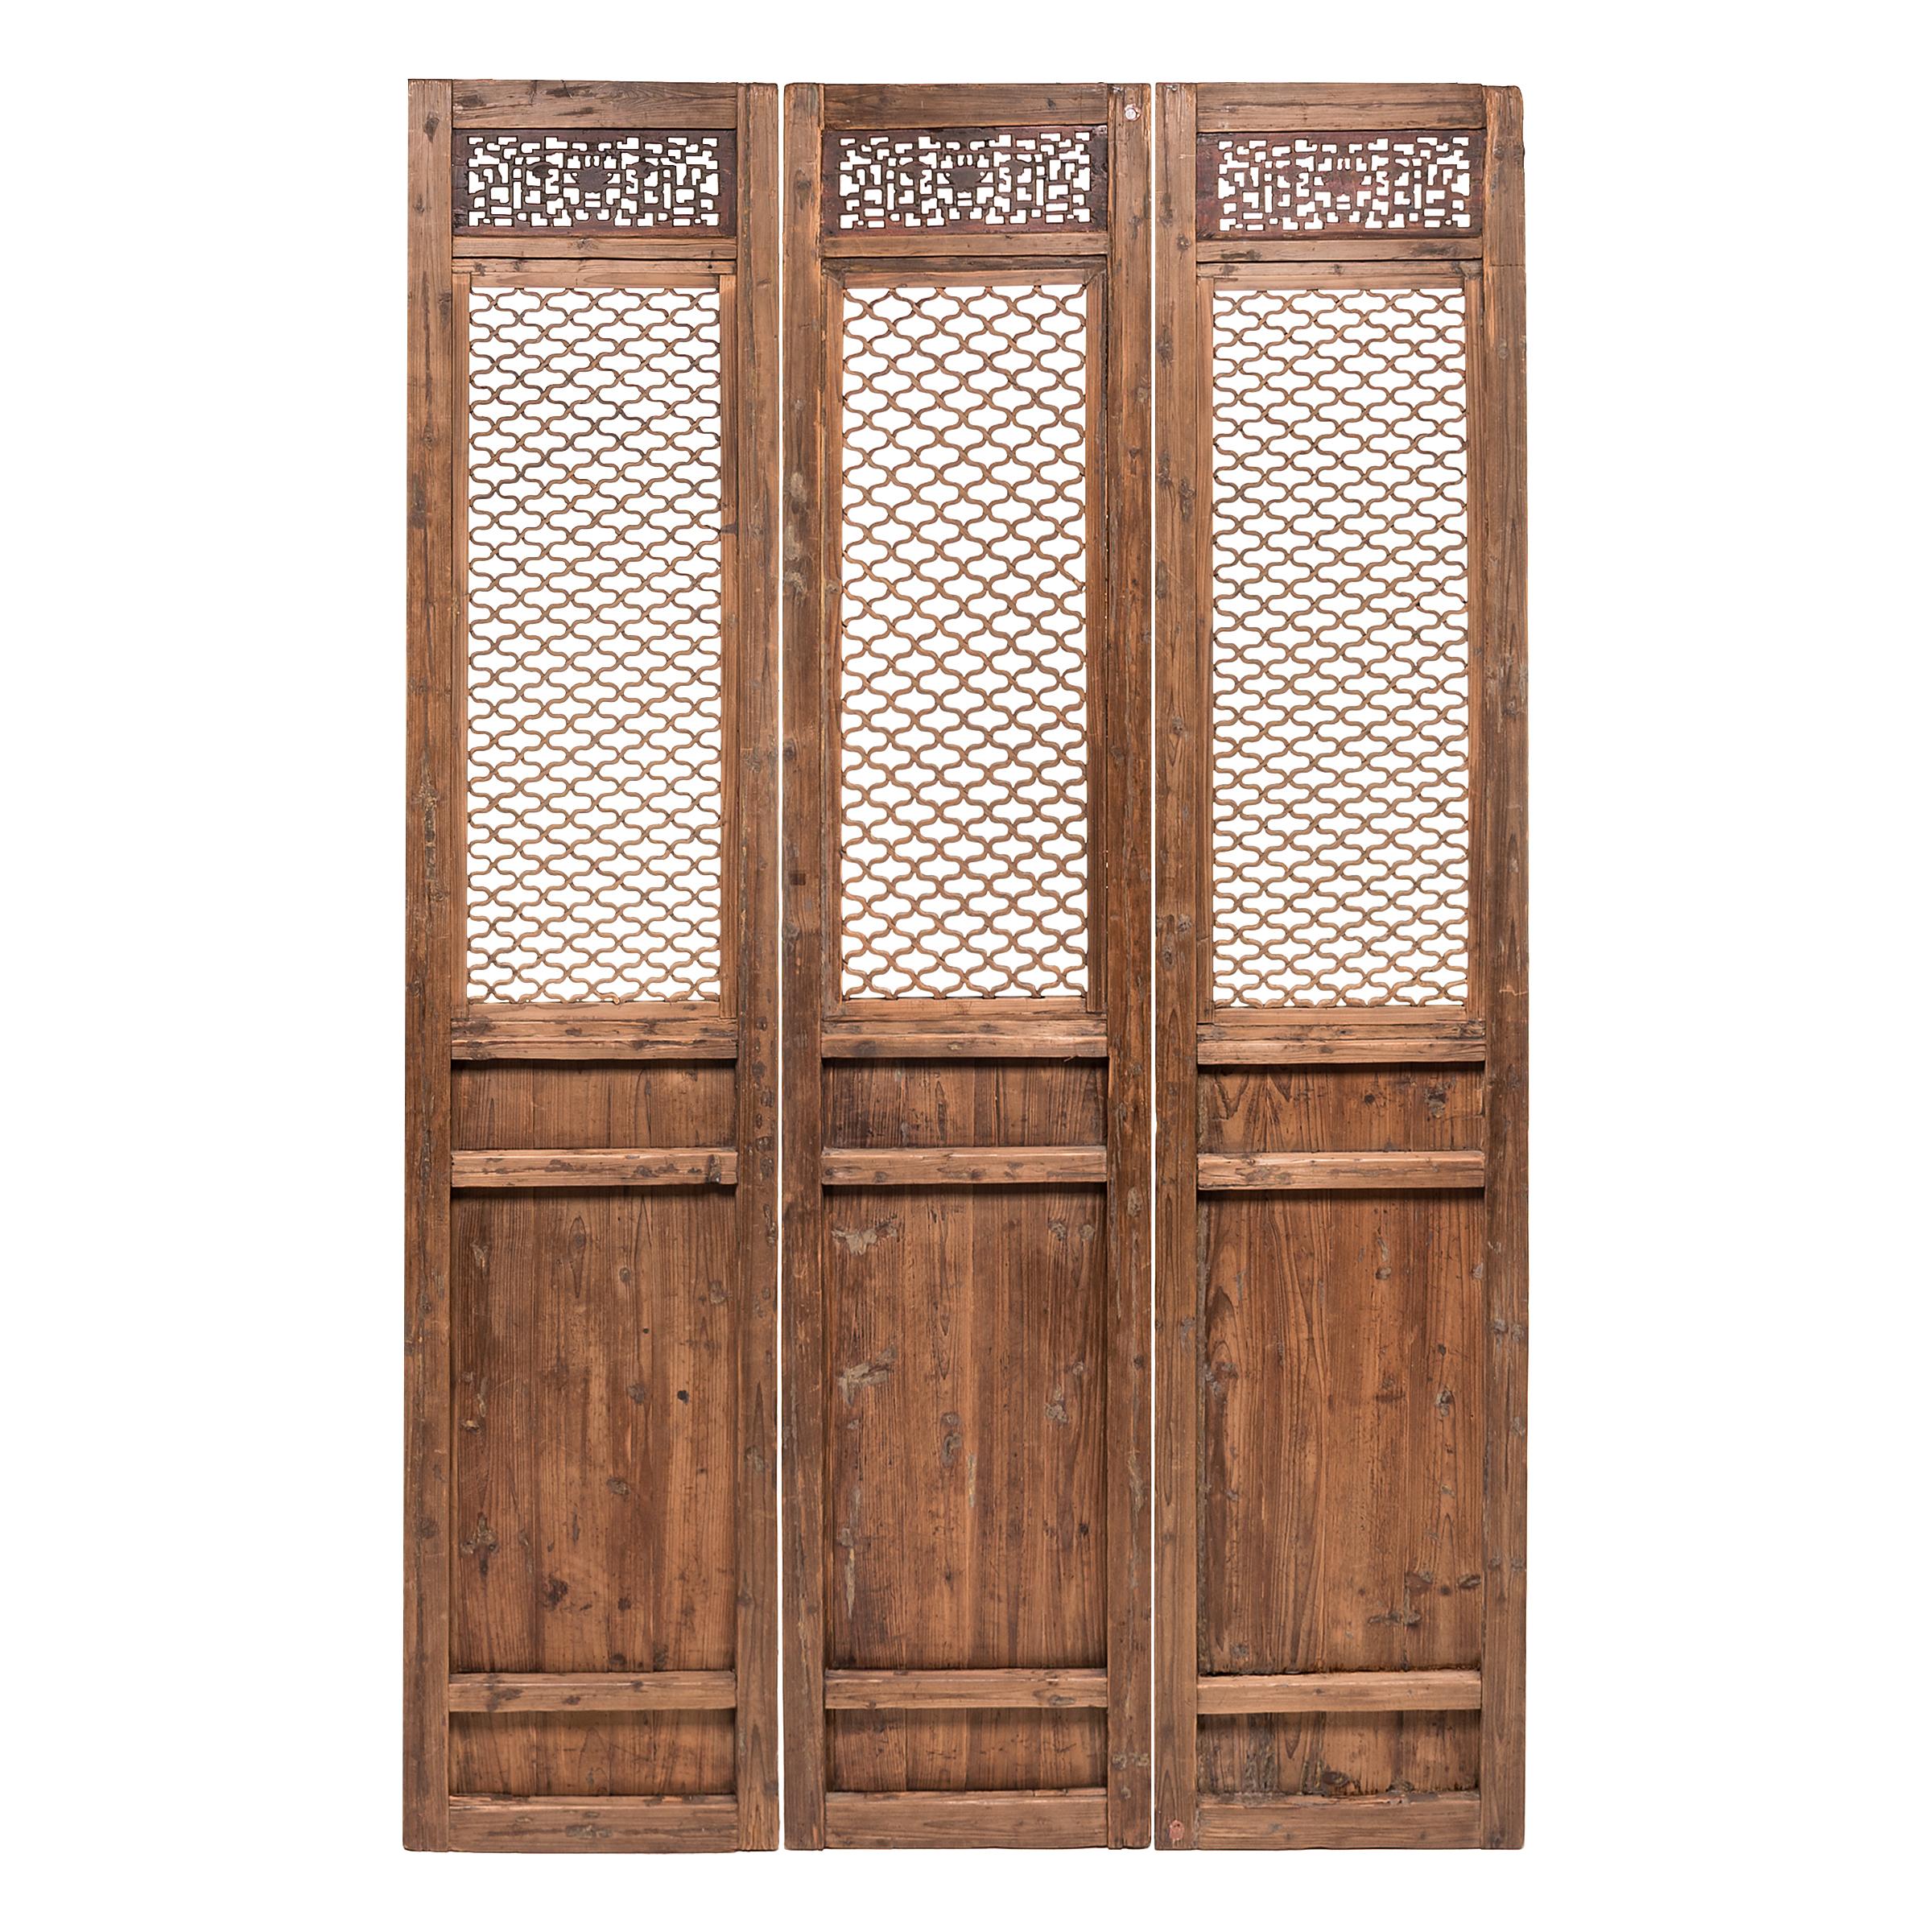 The sweeping elegance of these 19th-century courtyard doors, with their intricate lattice panels, hides the mathematical brilliance required to create them. The wax-finished, knotty panels evoke life in a traditional courtyard home, where the